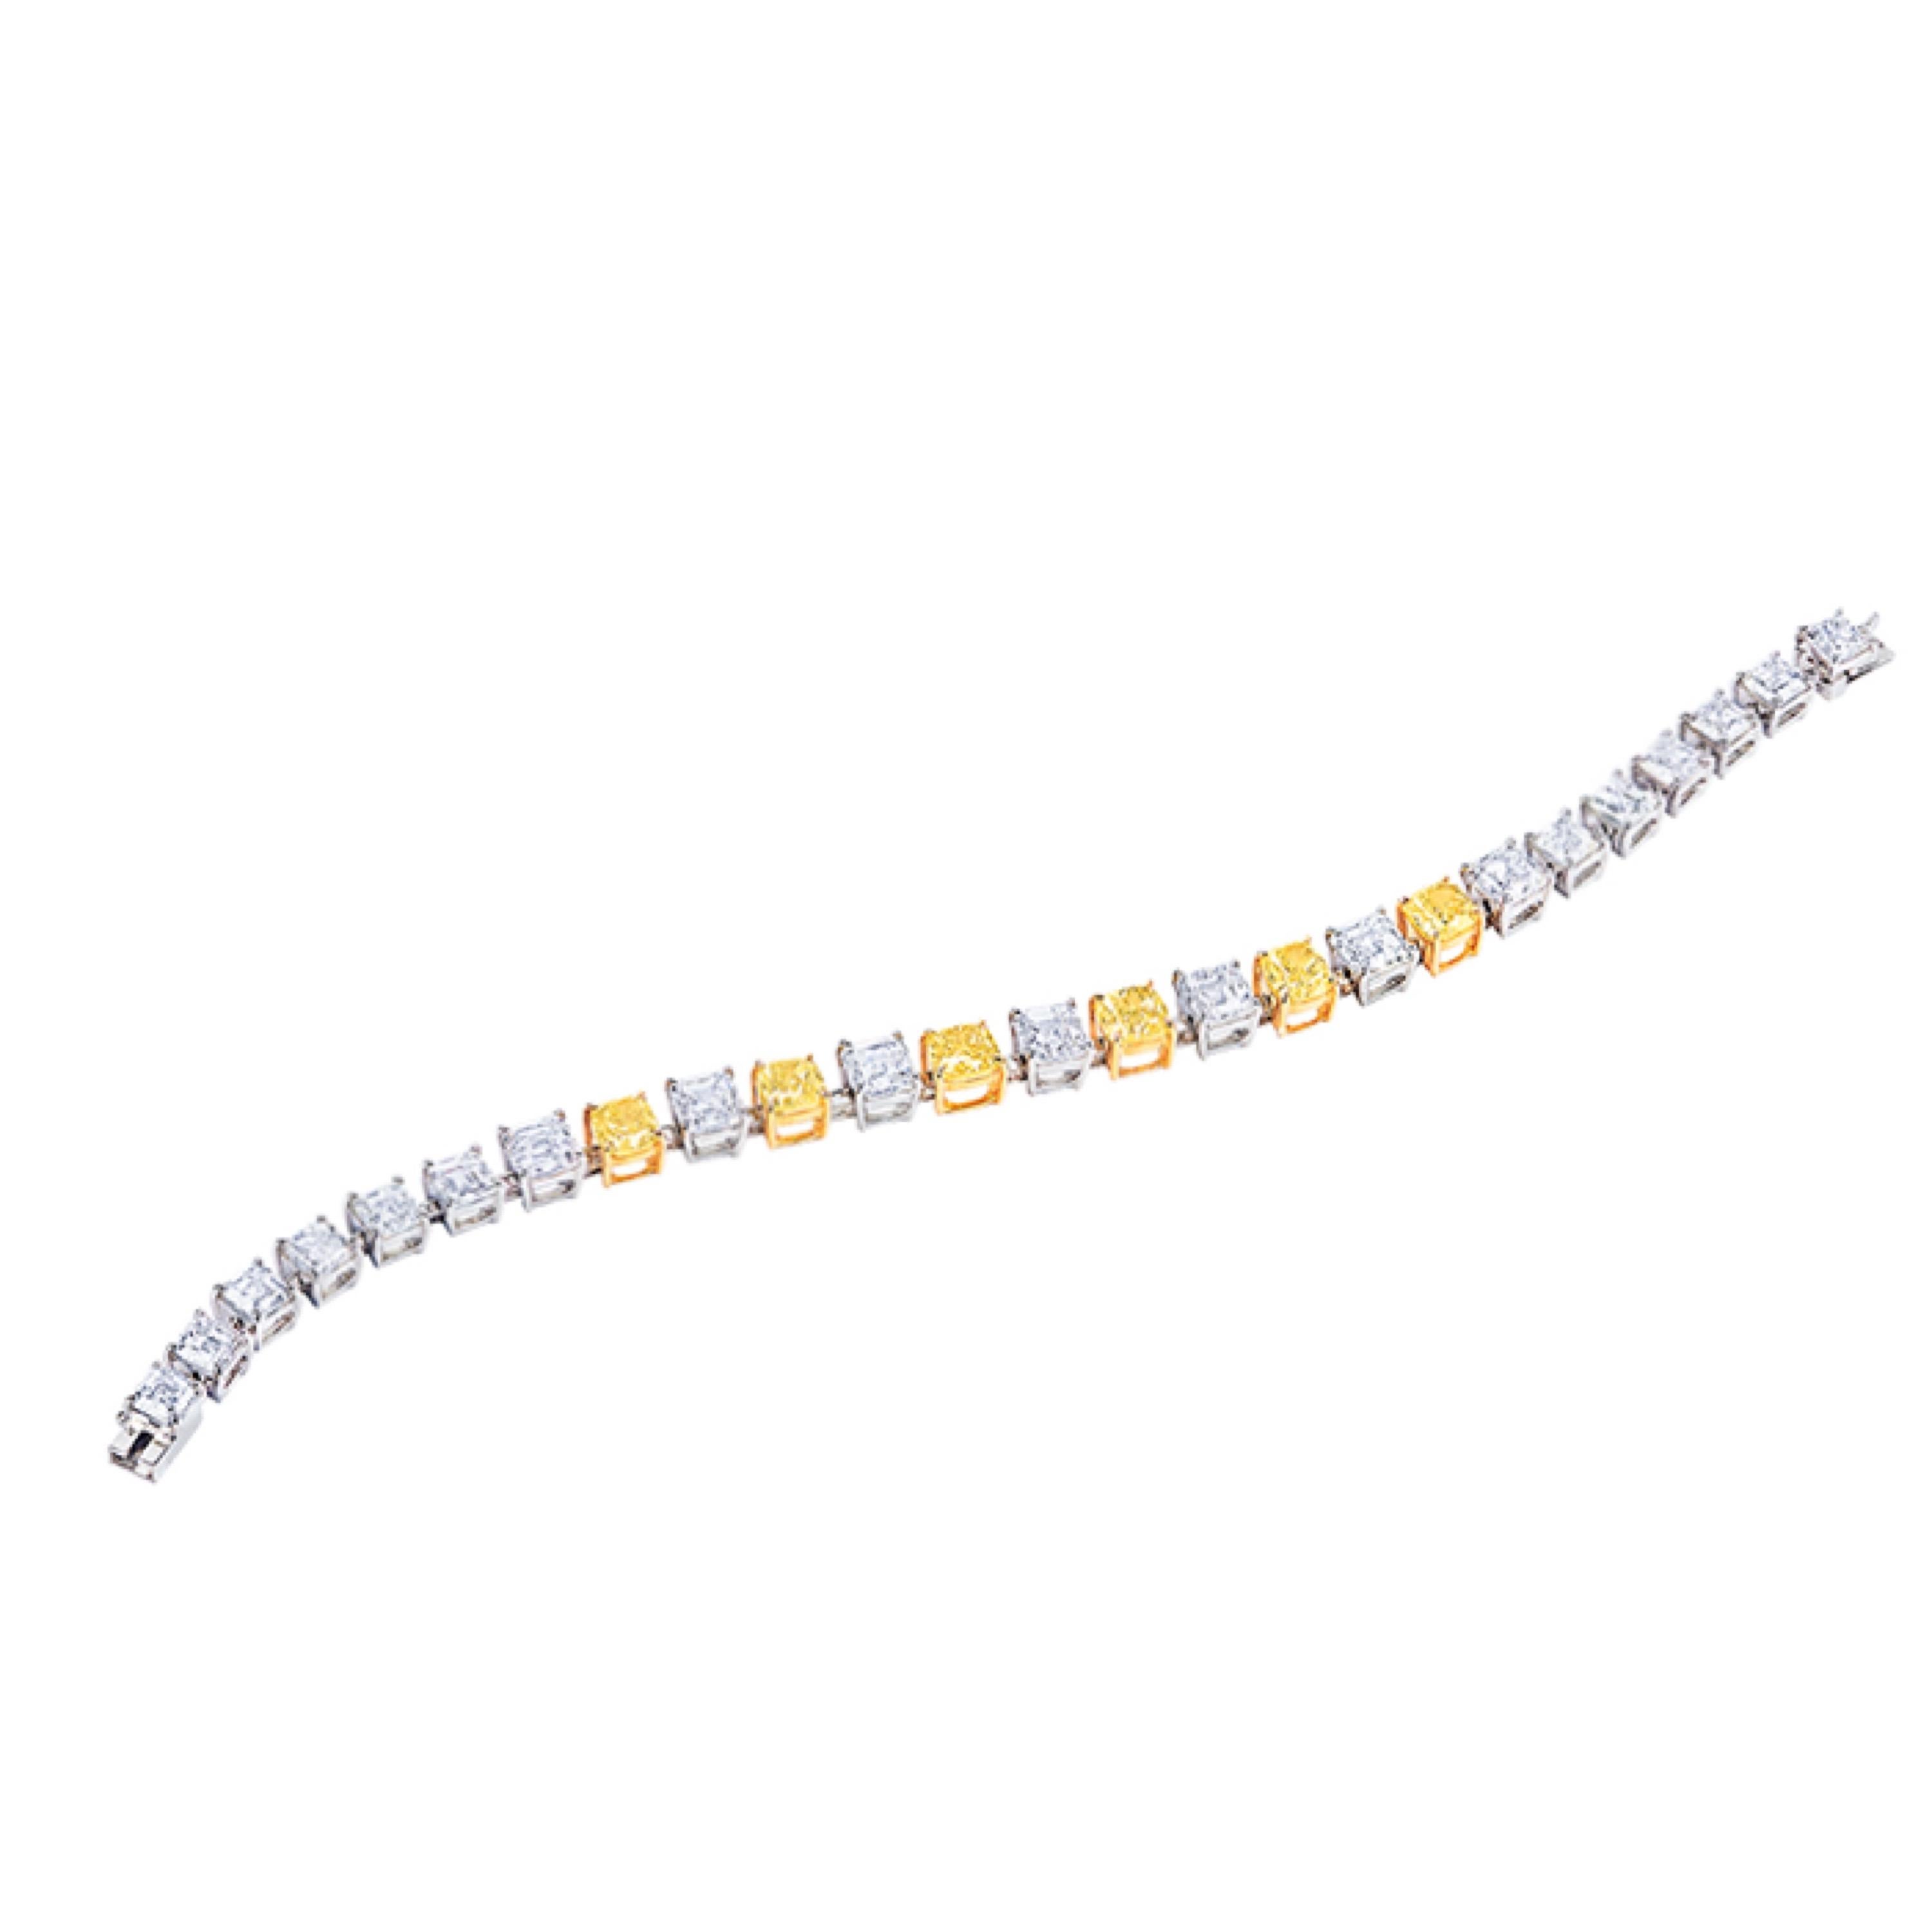 From the Emilio Jewelry Atelier in New York, 
Main stone: 6 fancy yellow diamonds with a total of about 4.74 carats Fancy Intense Yellow ~ Fancy Yellow CUSHION
Setting: 19 fancy-cut white diamonds totaling approximately 12.39 carats D~G IF~VS1